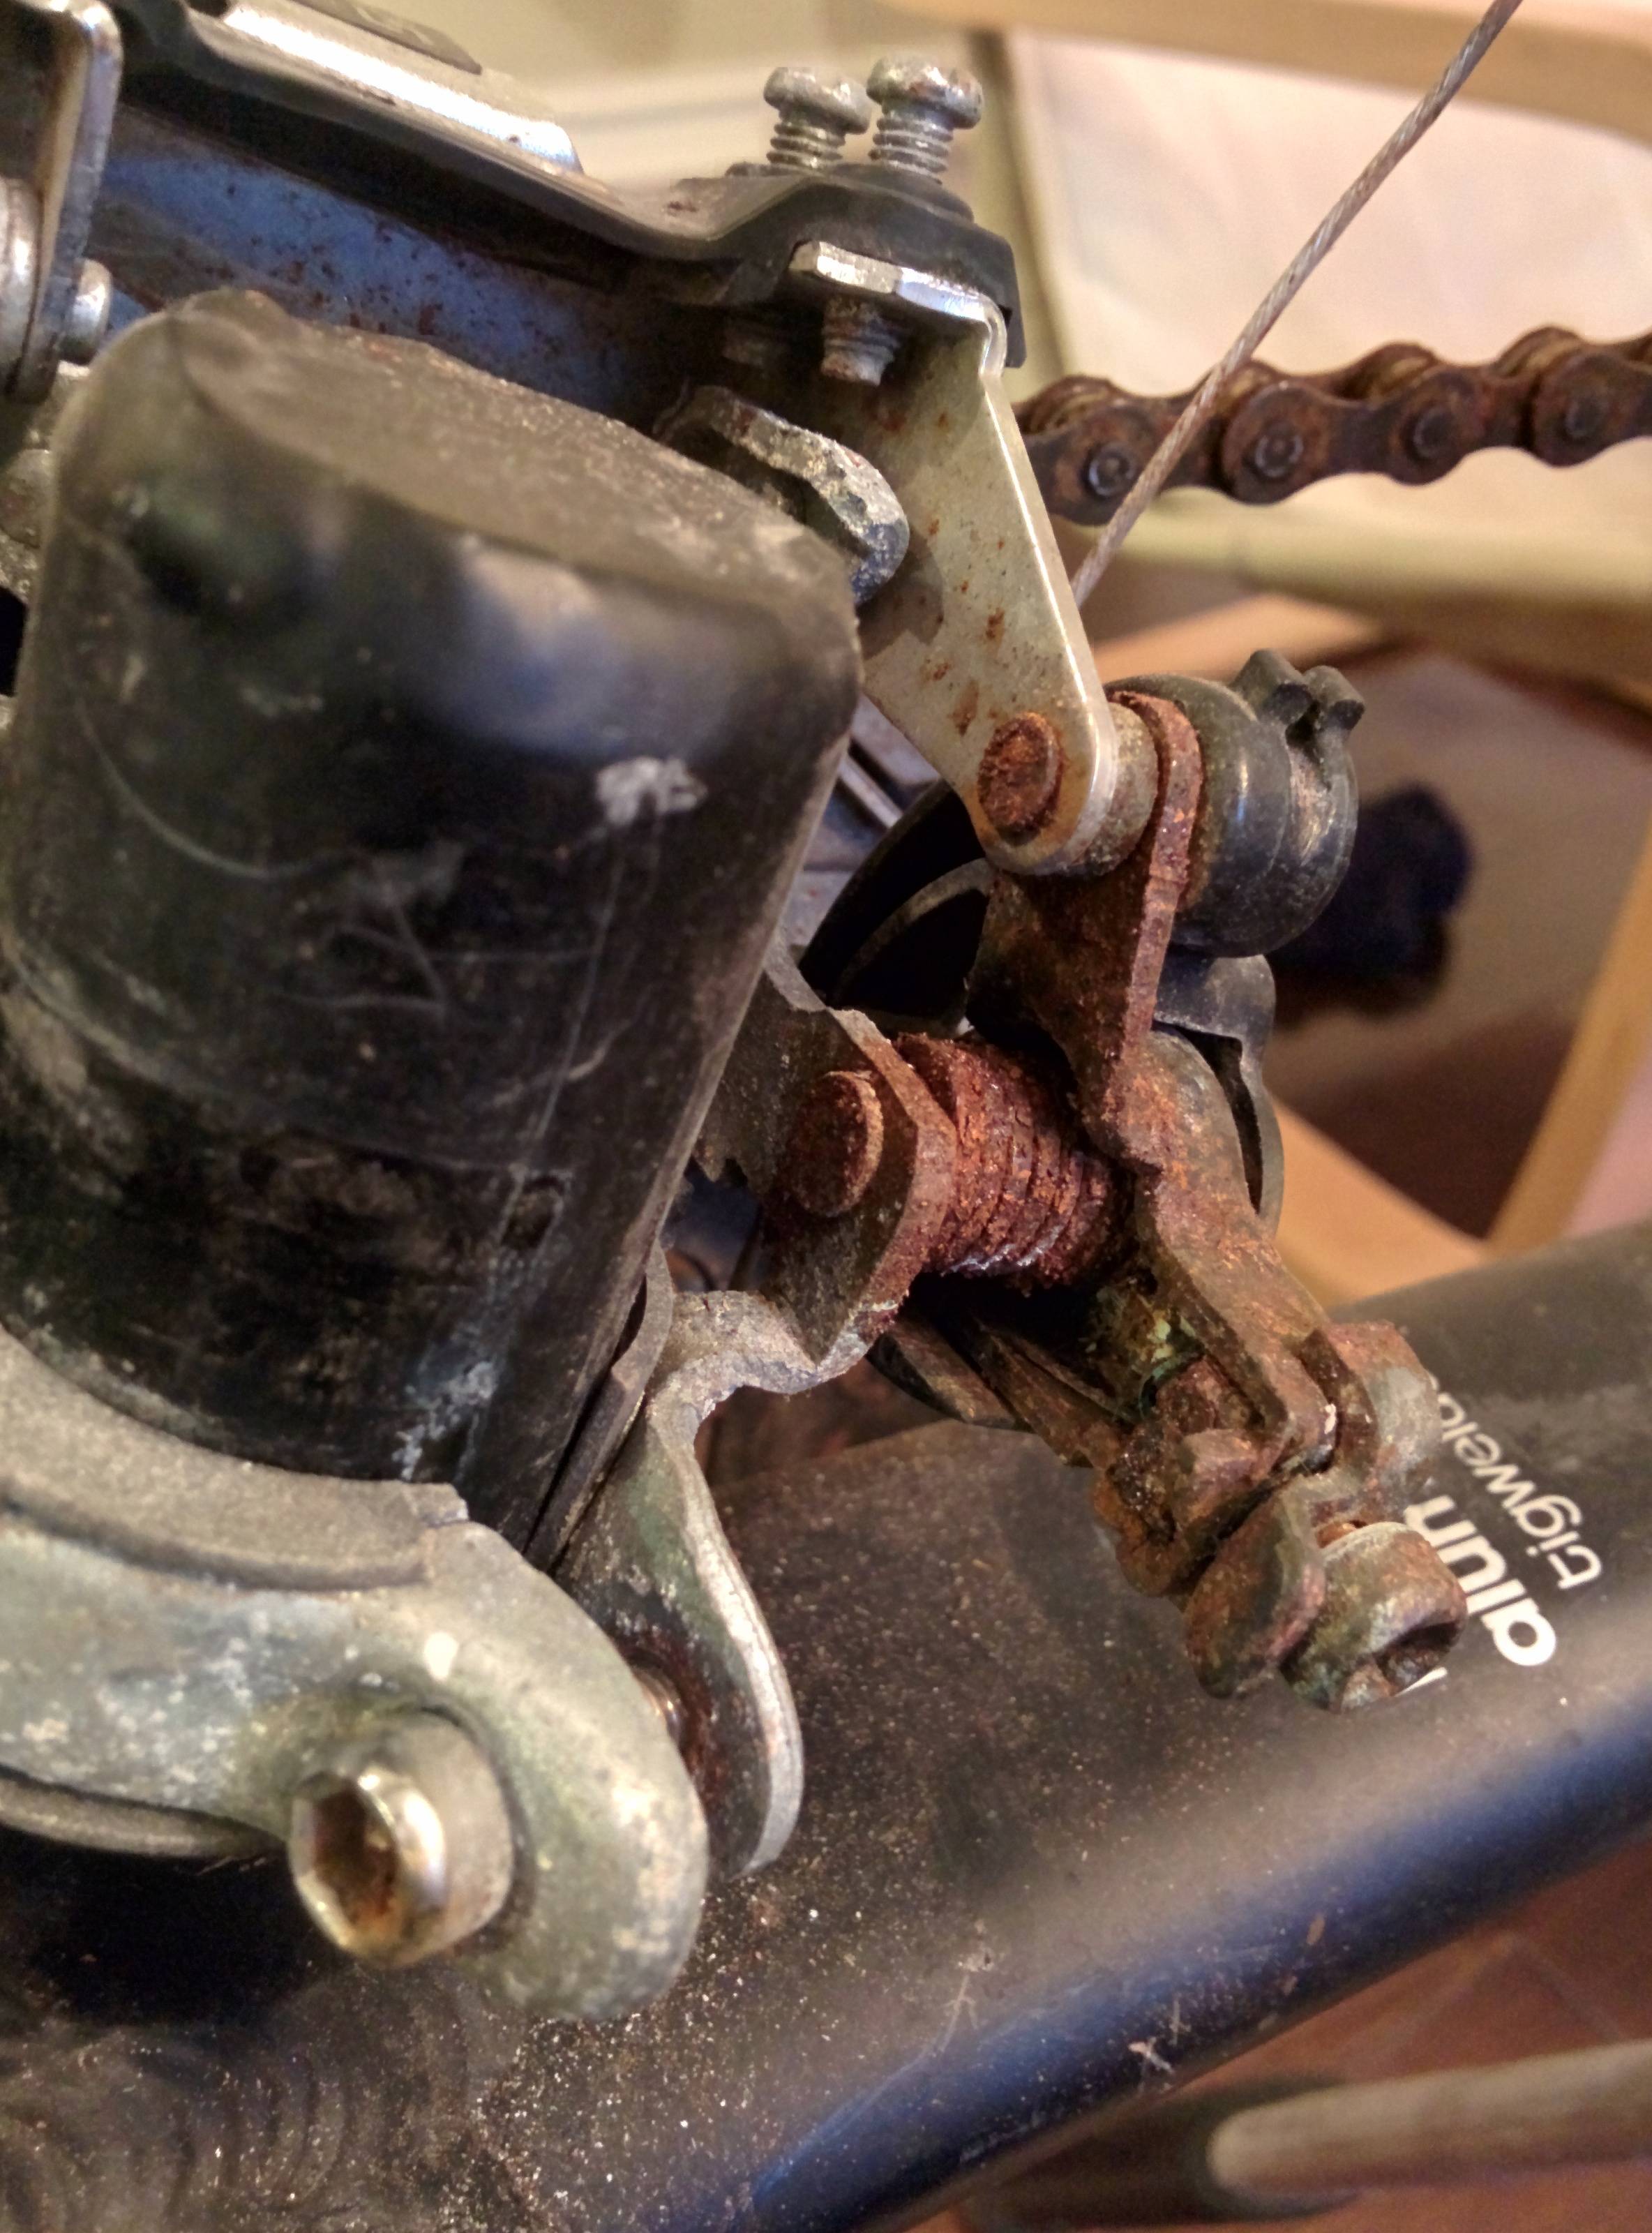 rust - Rusty Front Derailleur – Replace or Repair? - Bicycles Stack ...